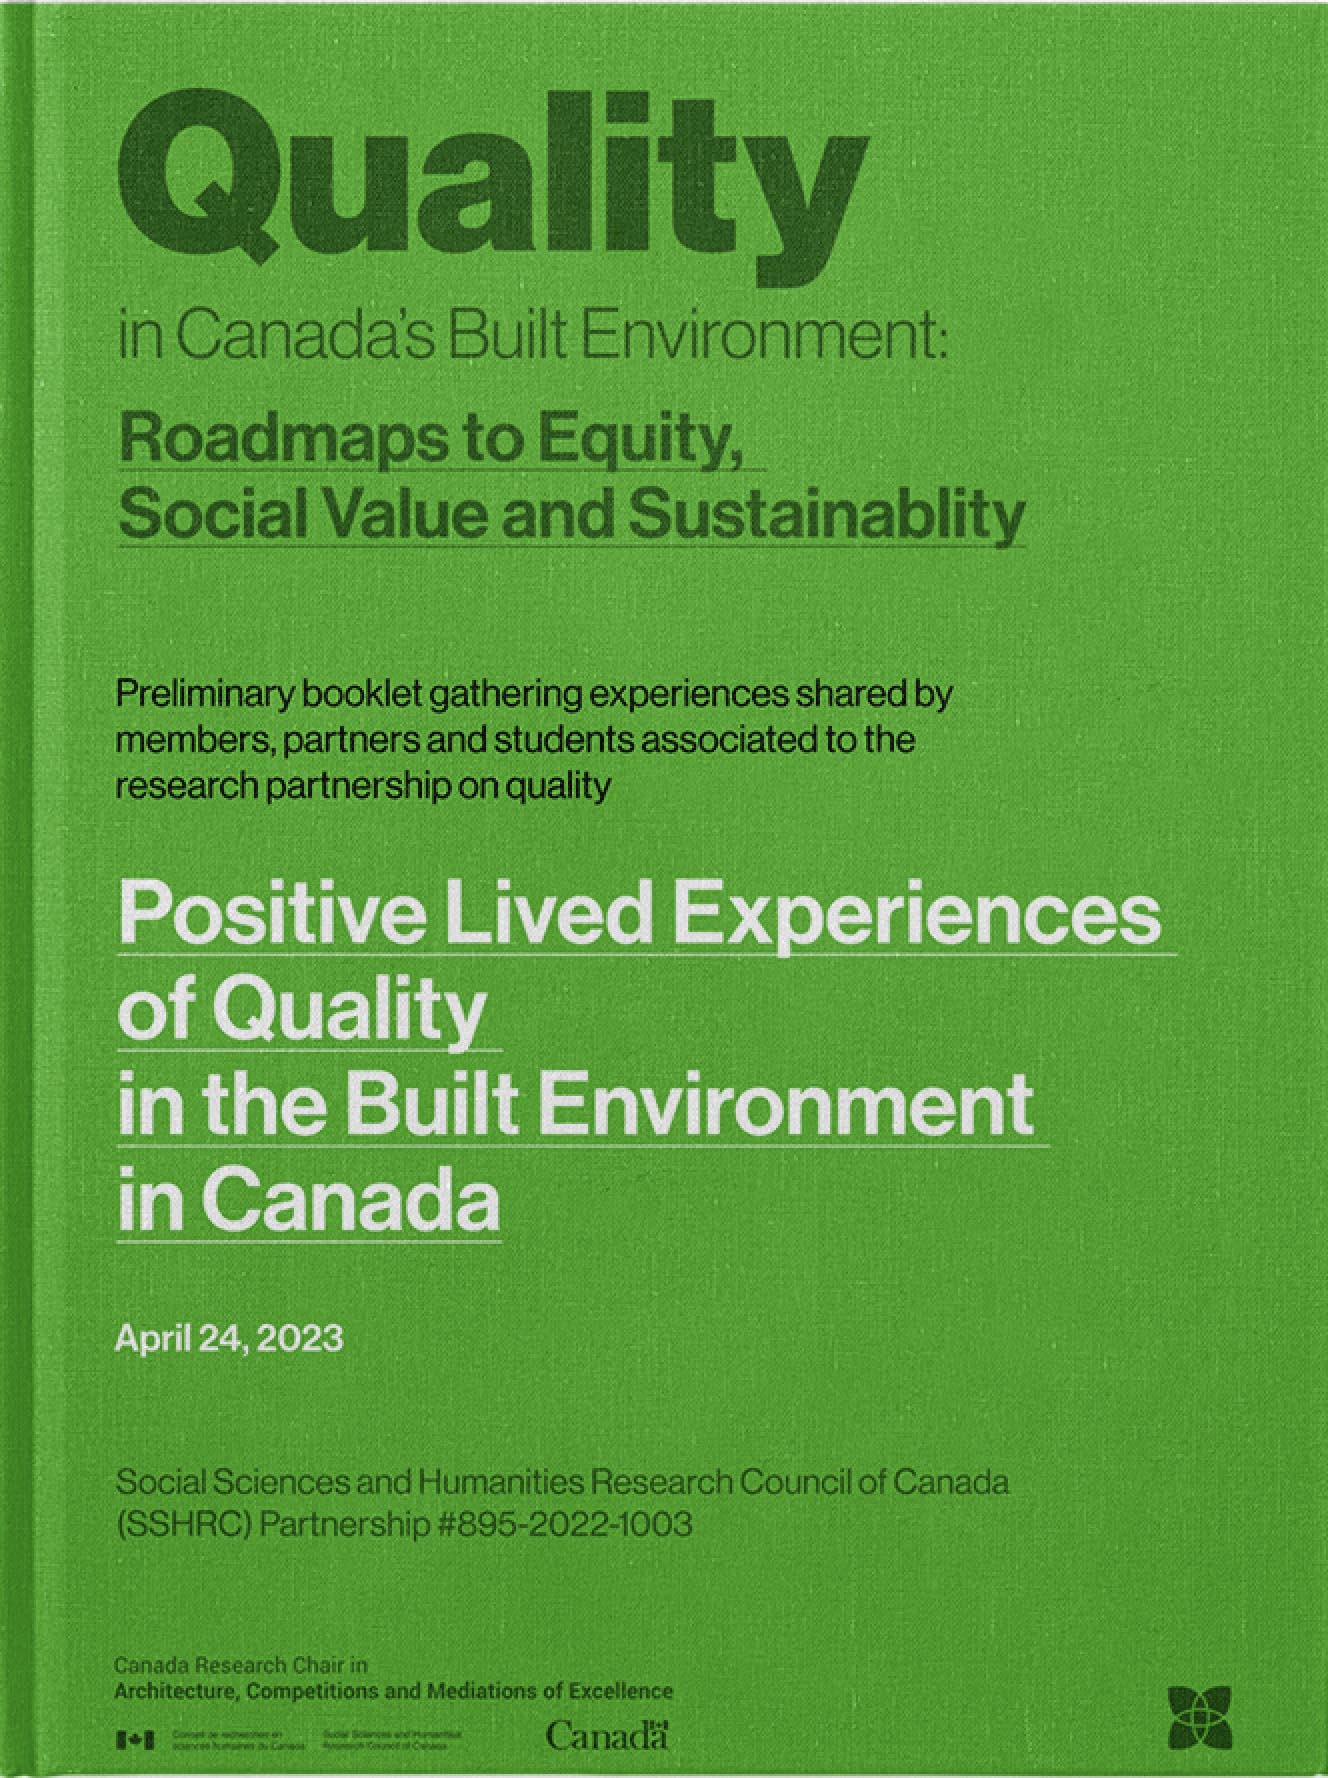 Positive Lived Experiences of Quality in the Built Environment in Canada. Booklet of experiences shared by members, partners and students associated with the Quality Research Partnership (SSHRC #895-2022-1003). Edited by Jean-Pierre Chupin, 2023, Université de Montréal. 274 pages.D